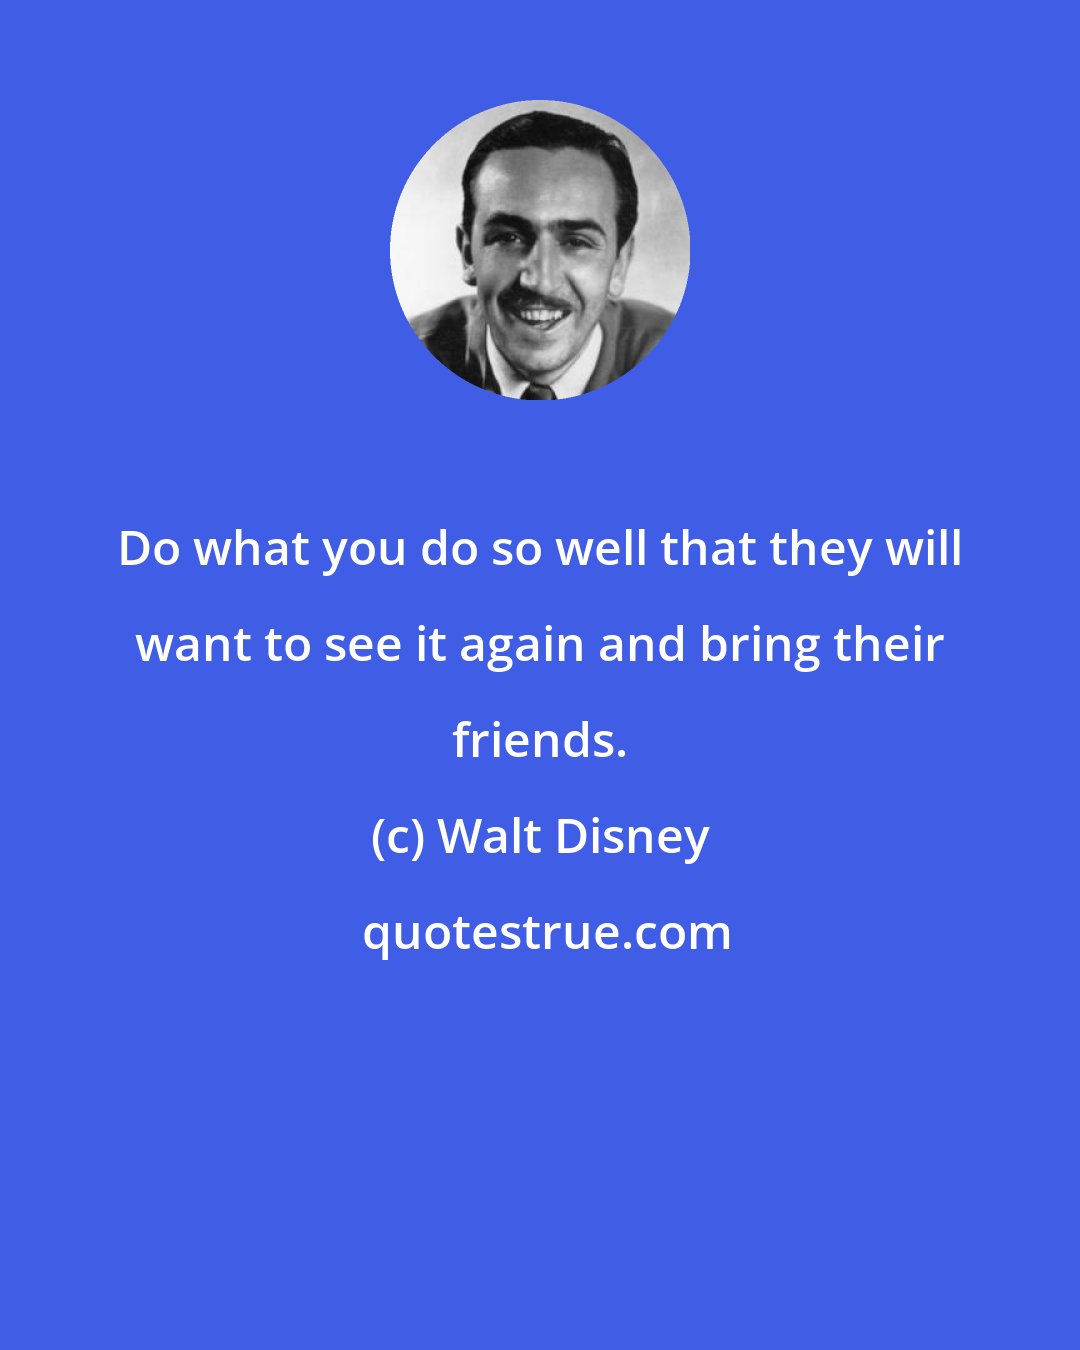 Walt Disney: Do what you do so well that they will want to see it again and bring their friends.